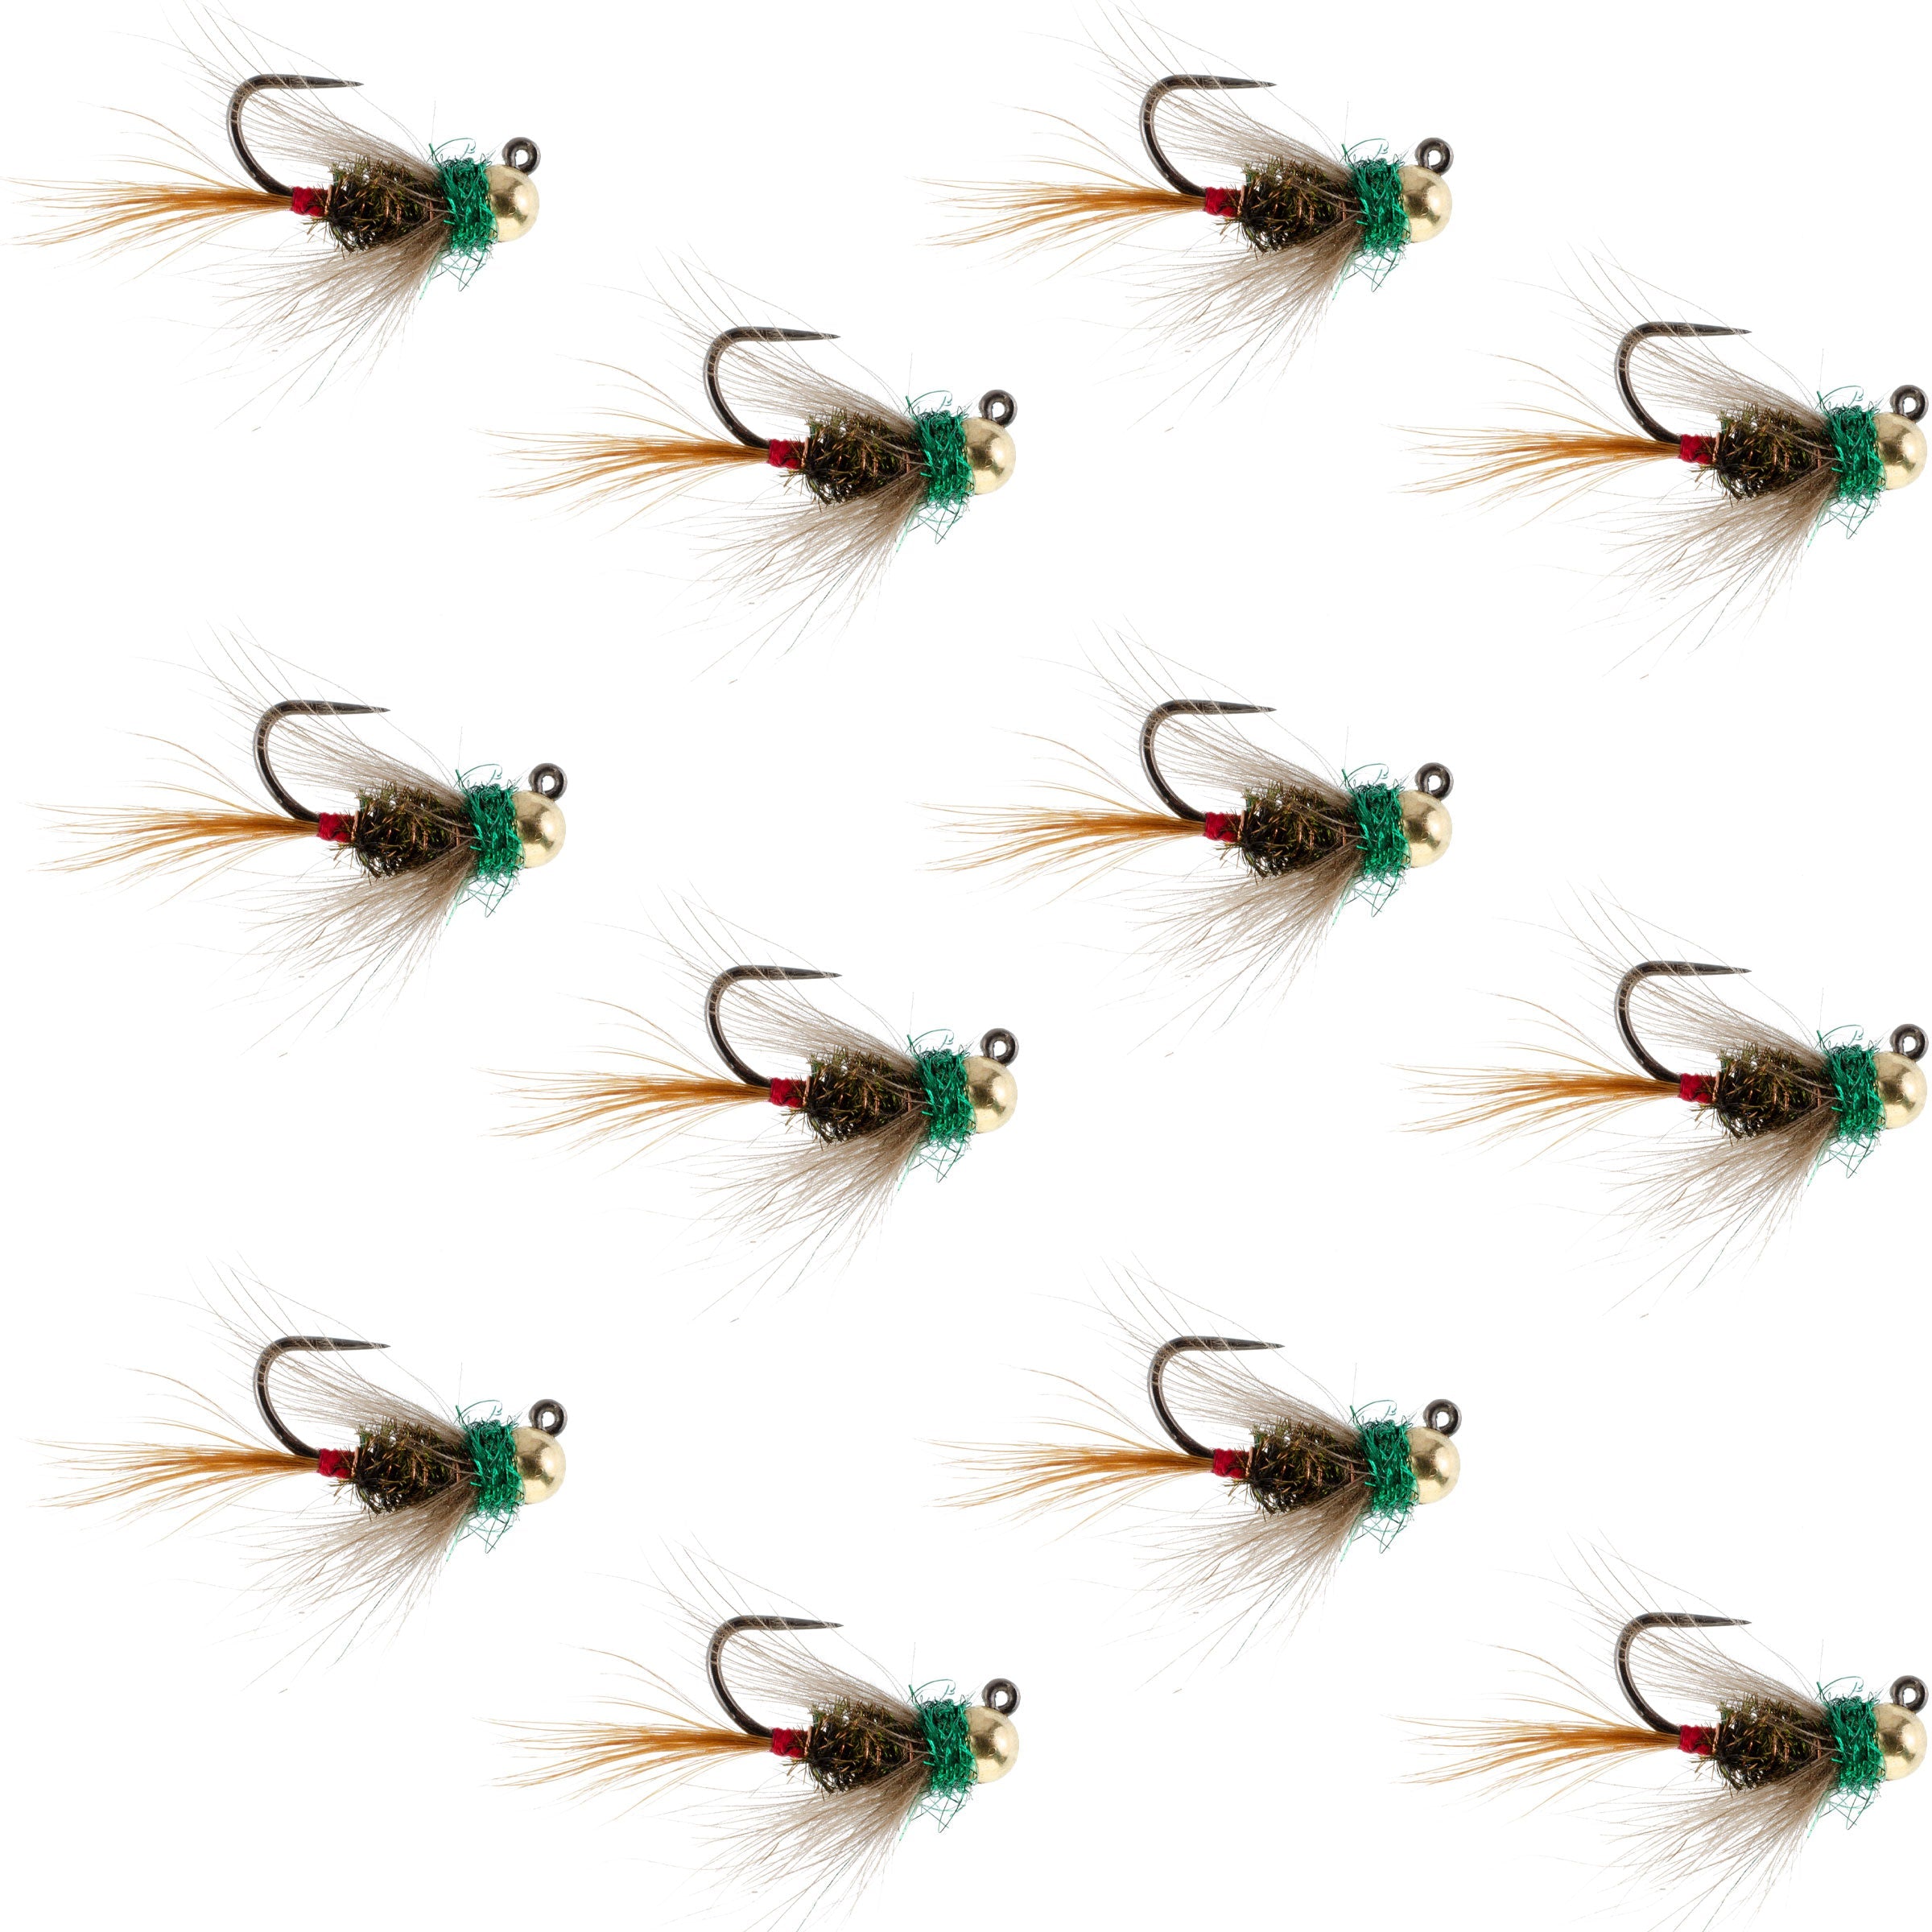 Tungsten Bead Tactical CDC Frenchie Czech Nymph Euro Nymphing Fly - 1 Dozen Flies Size 14